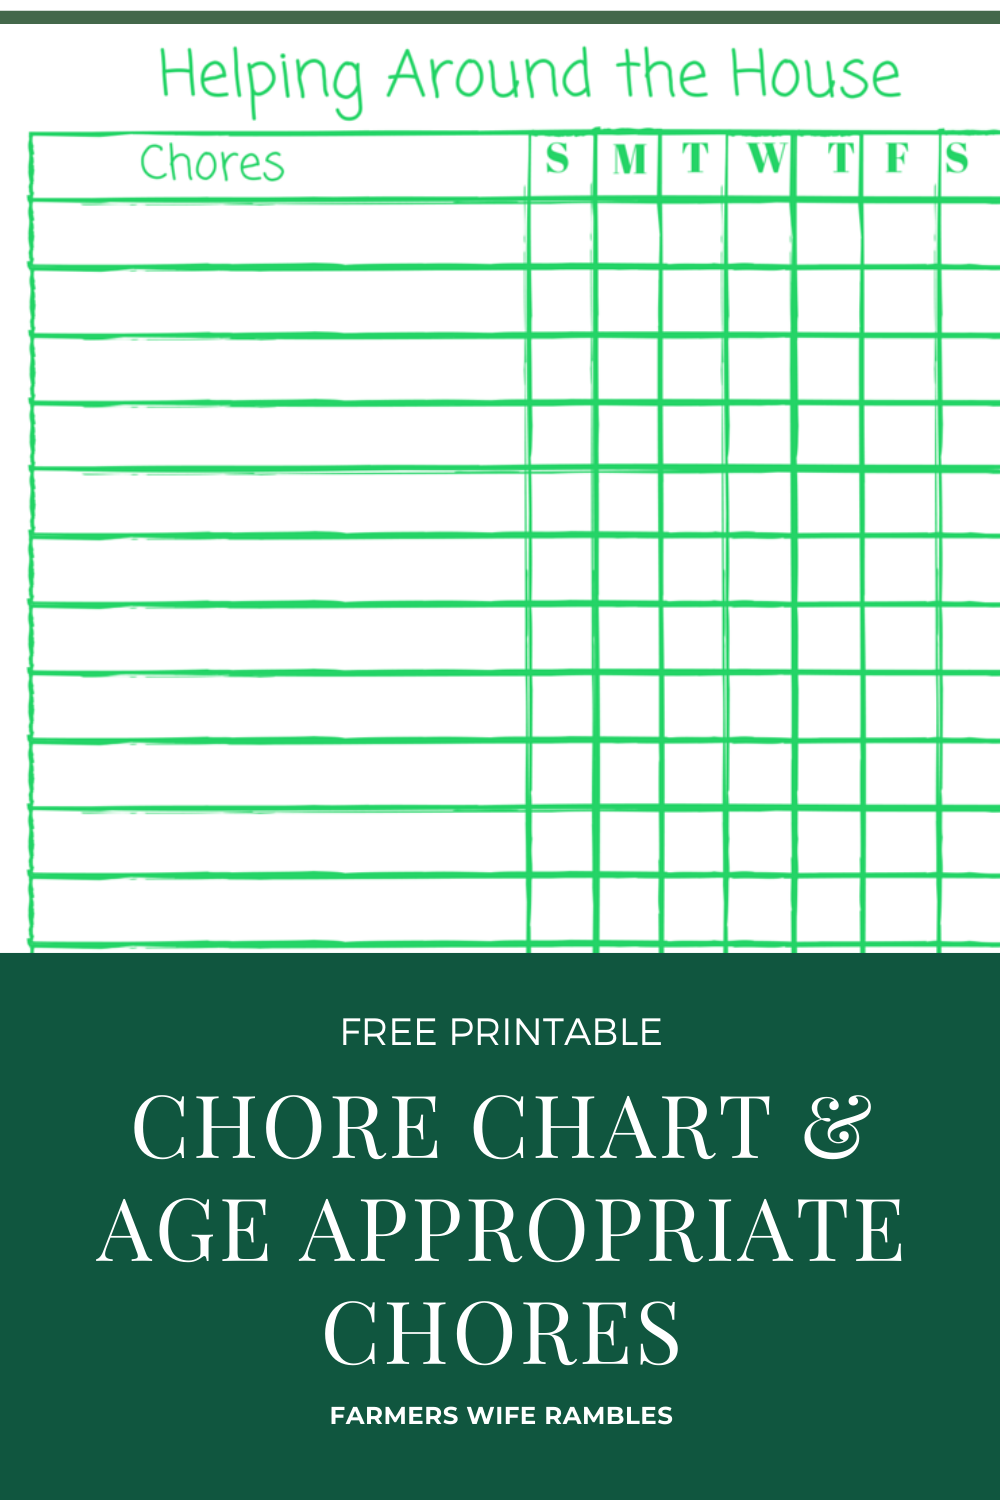 Free Printable Chore Chart + Age Appropriate Chores Farmer's Wife Rambles